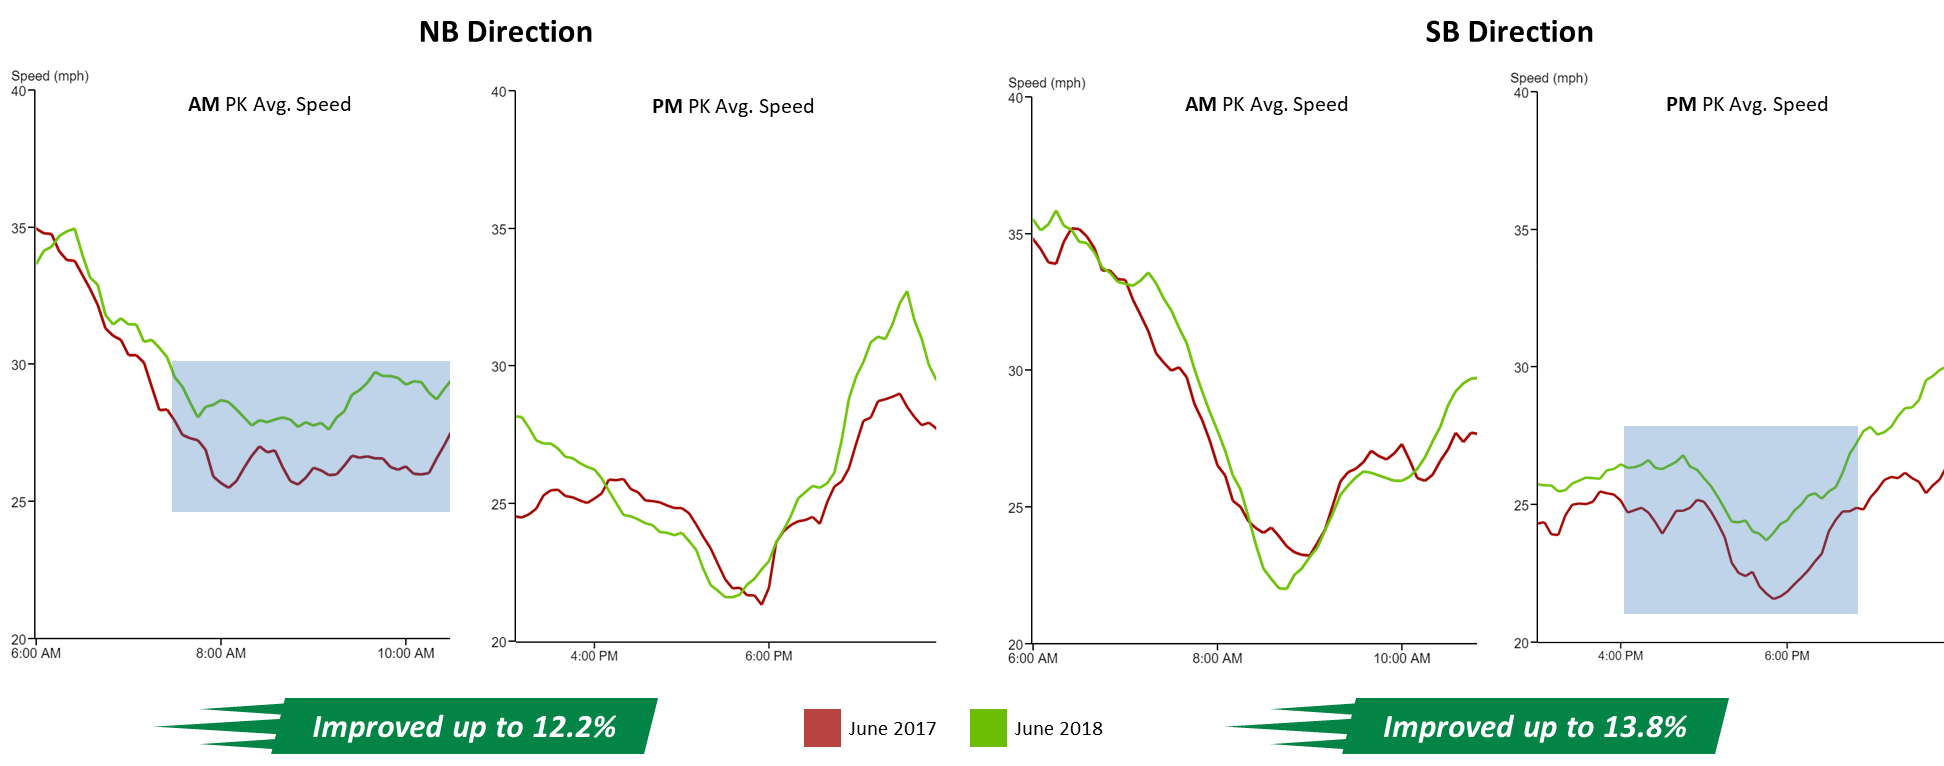 A screenshot of four line graphs, side-by-side, showing northbound and southbound AM and PM peak hour speeds, with annotations at the bottom celebrating the improved performance